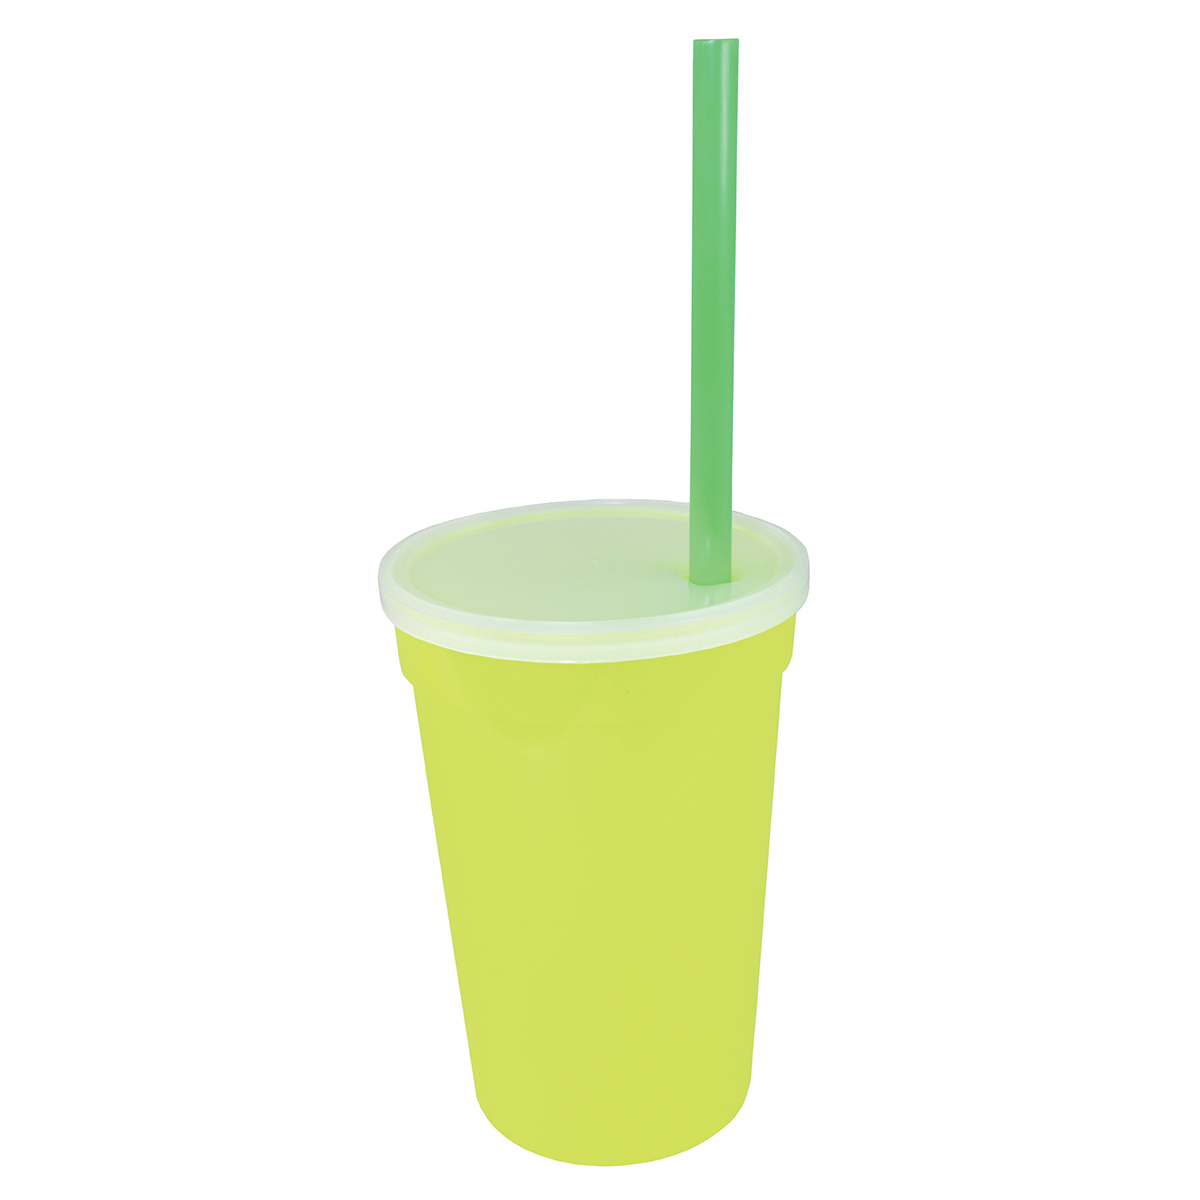 Neon Yellow with green straw